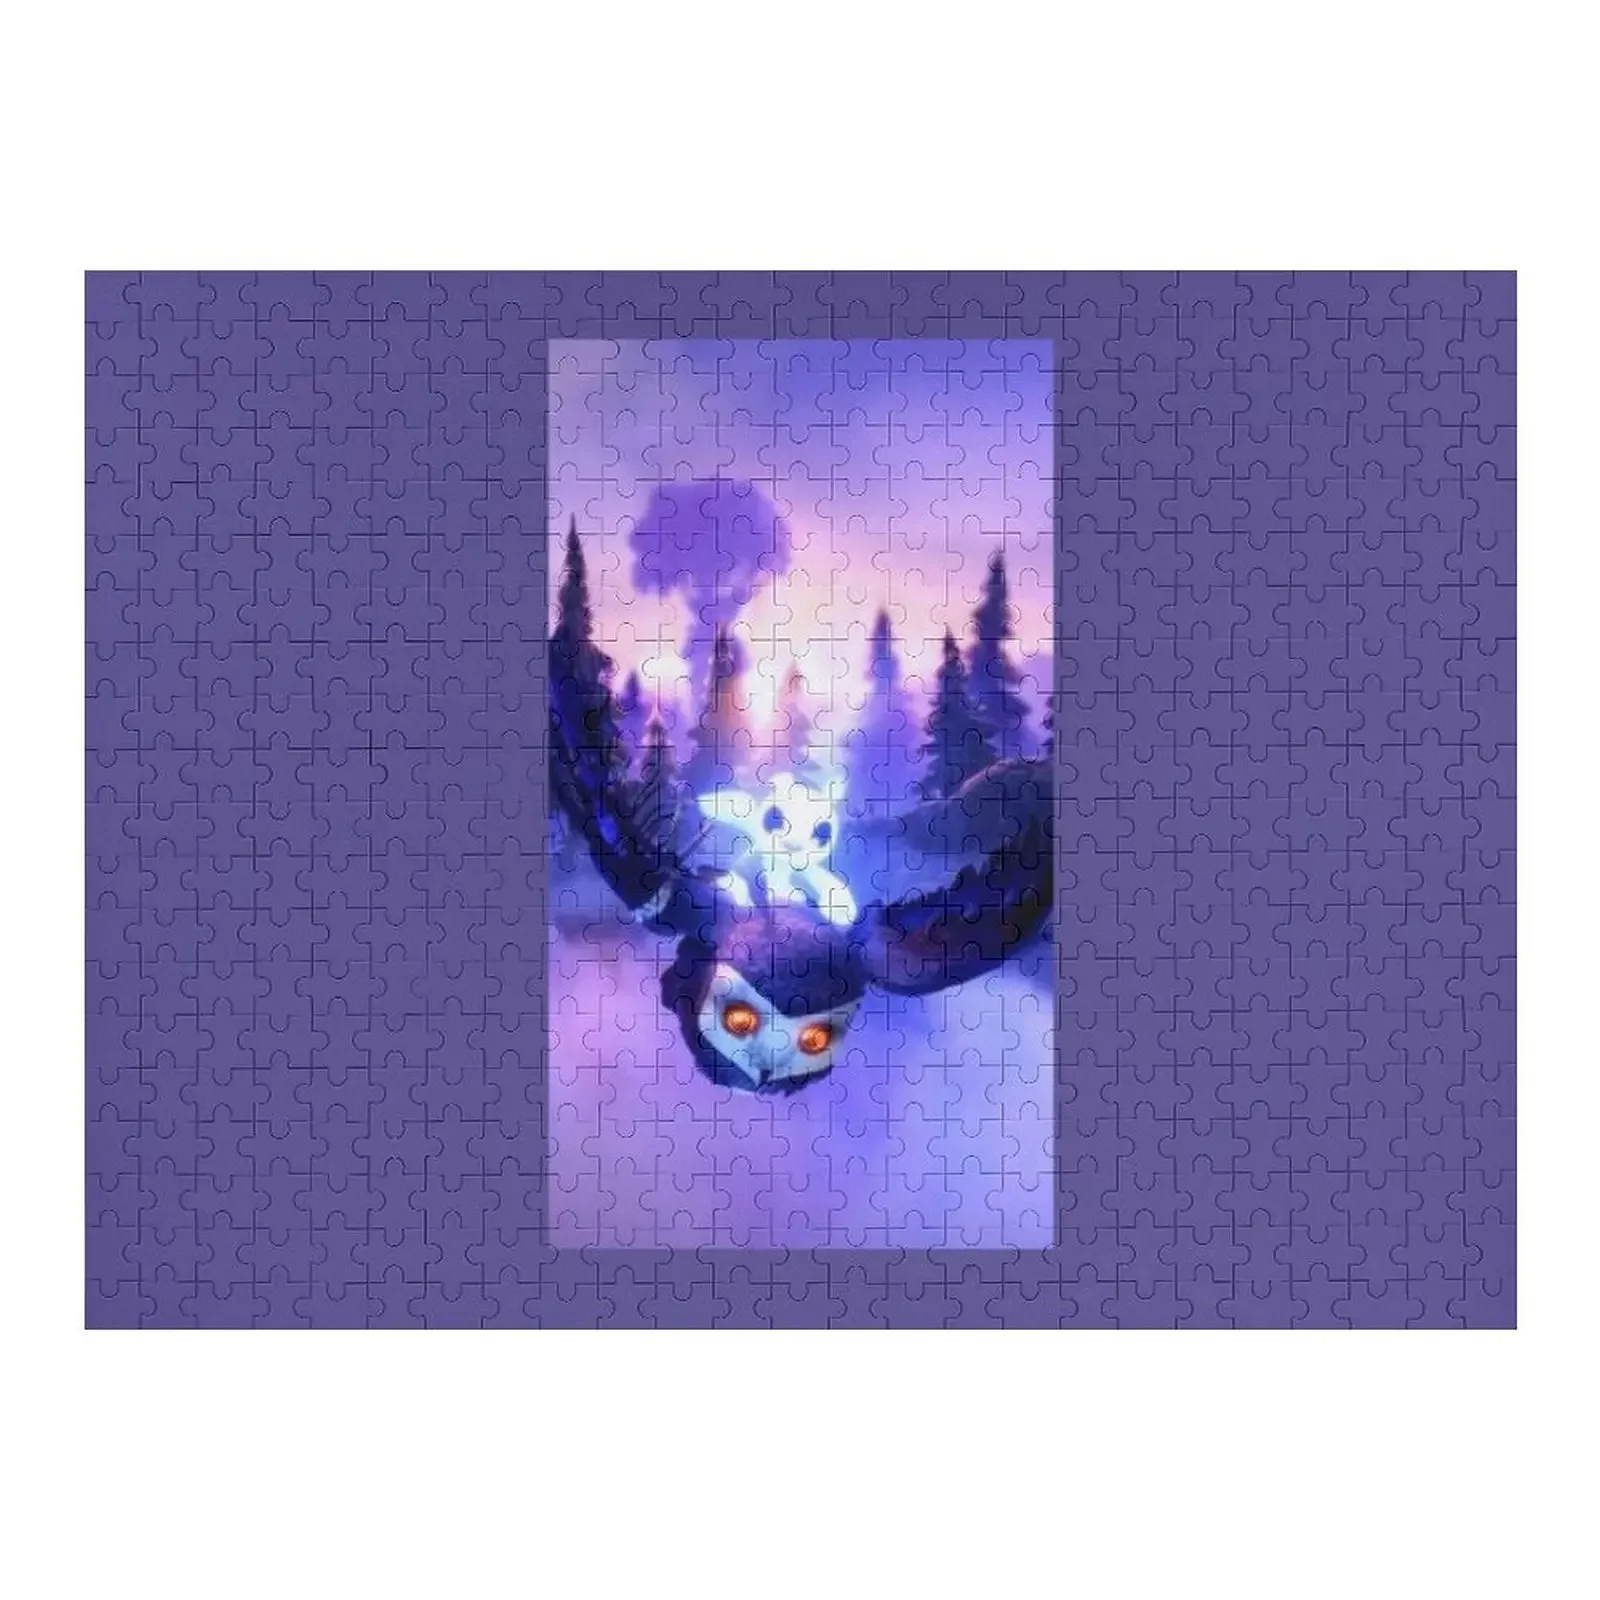 ori and the blind forest Premium Jigsaw Puzzle Personalized Toy Jigsaw Pieces Adults Customized Photo Puzzle